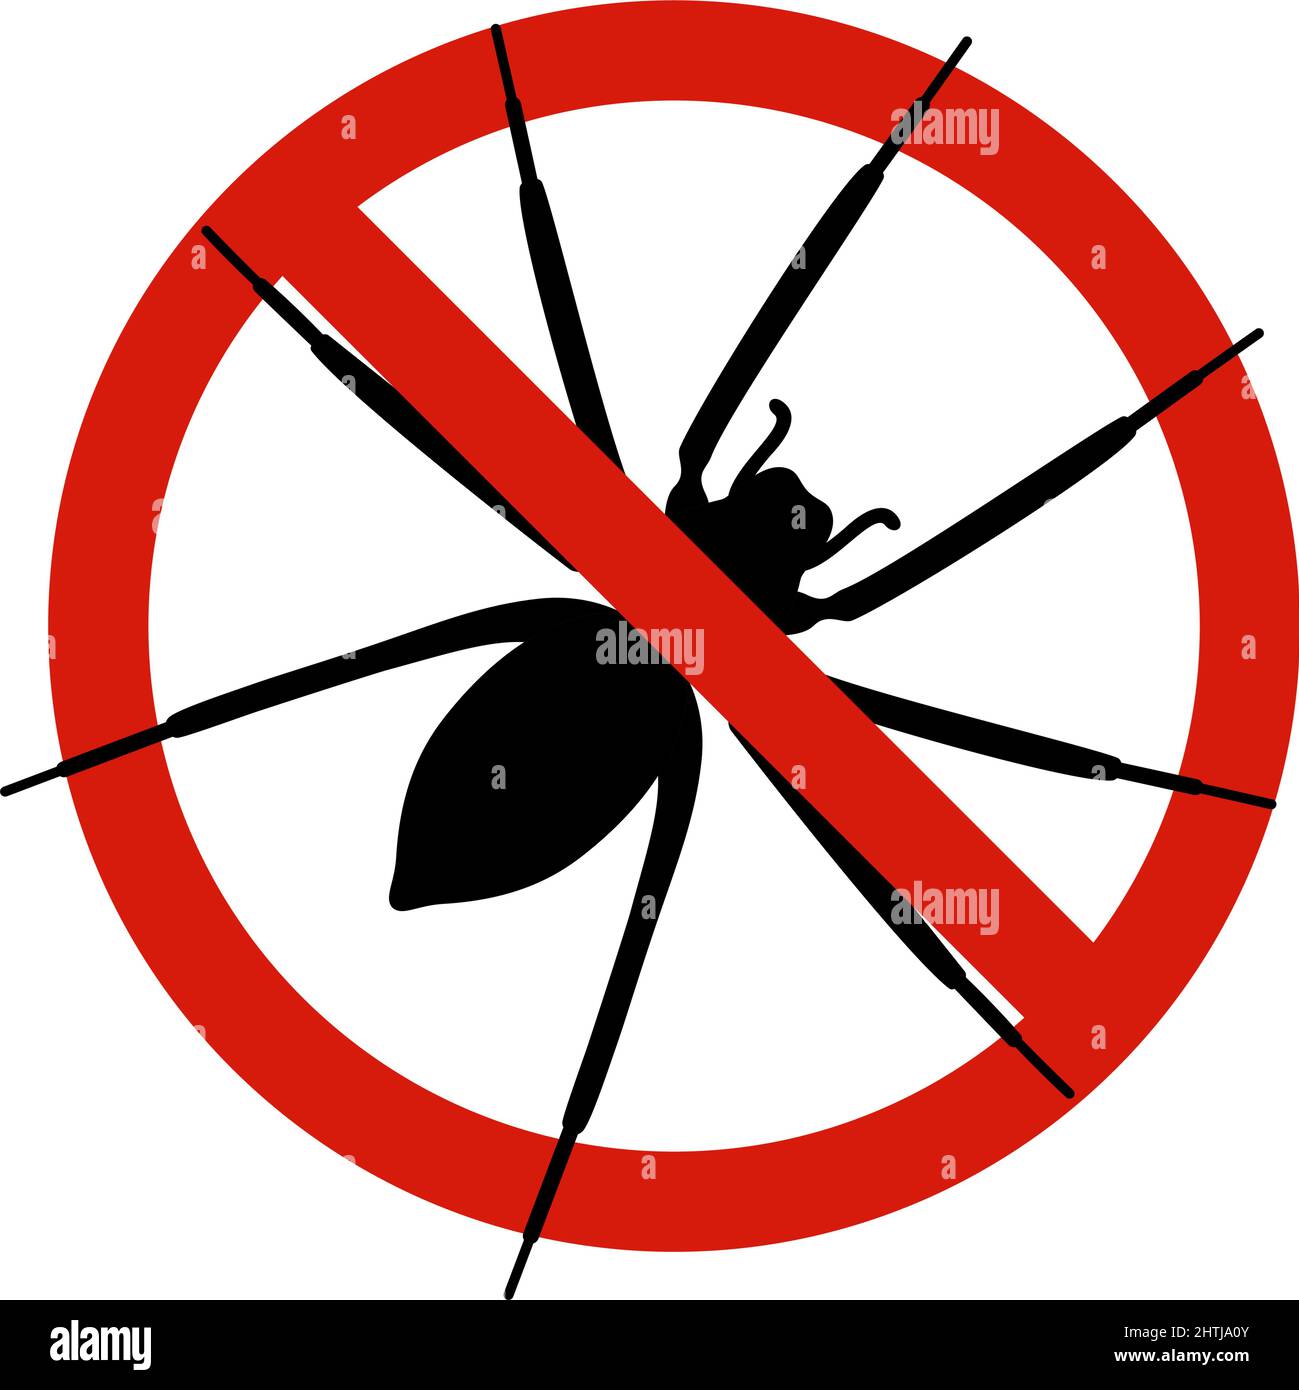 Anti spider, pest control. Stop insects sign. Silhouette of spider in red forbidding circle, vector illsutration Stock Vector